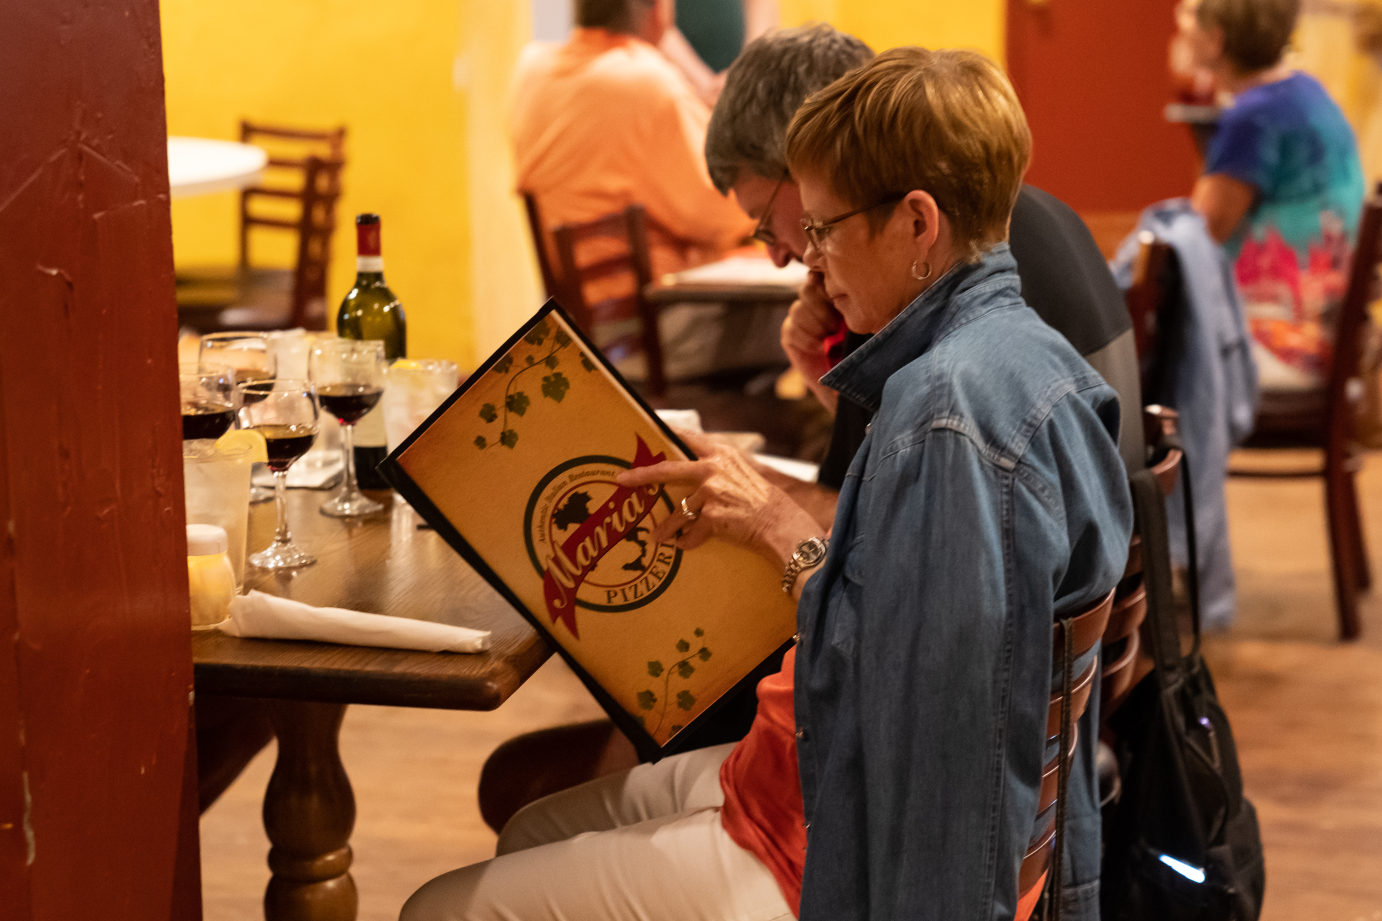 Interior, a guest reading the menu at table